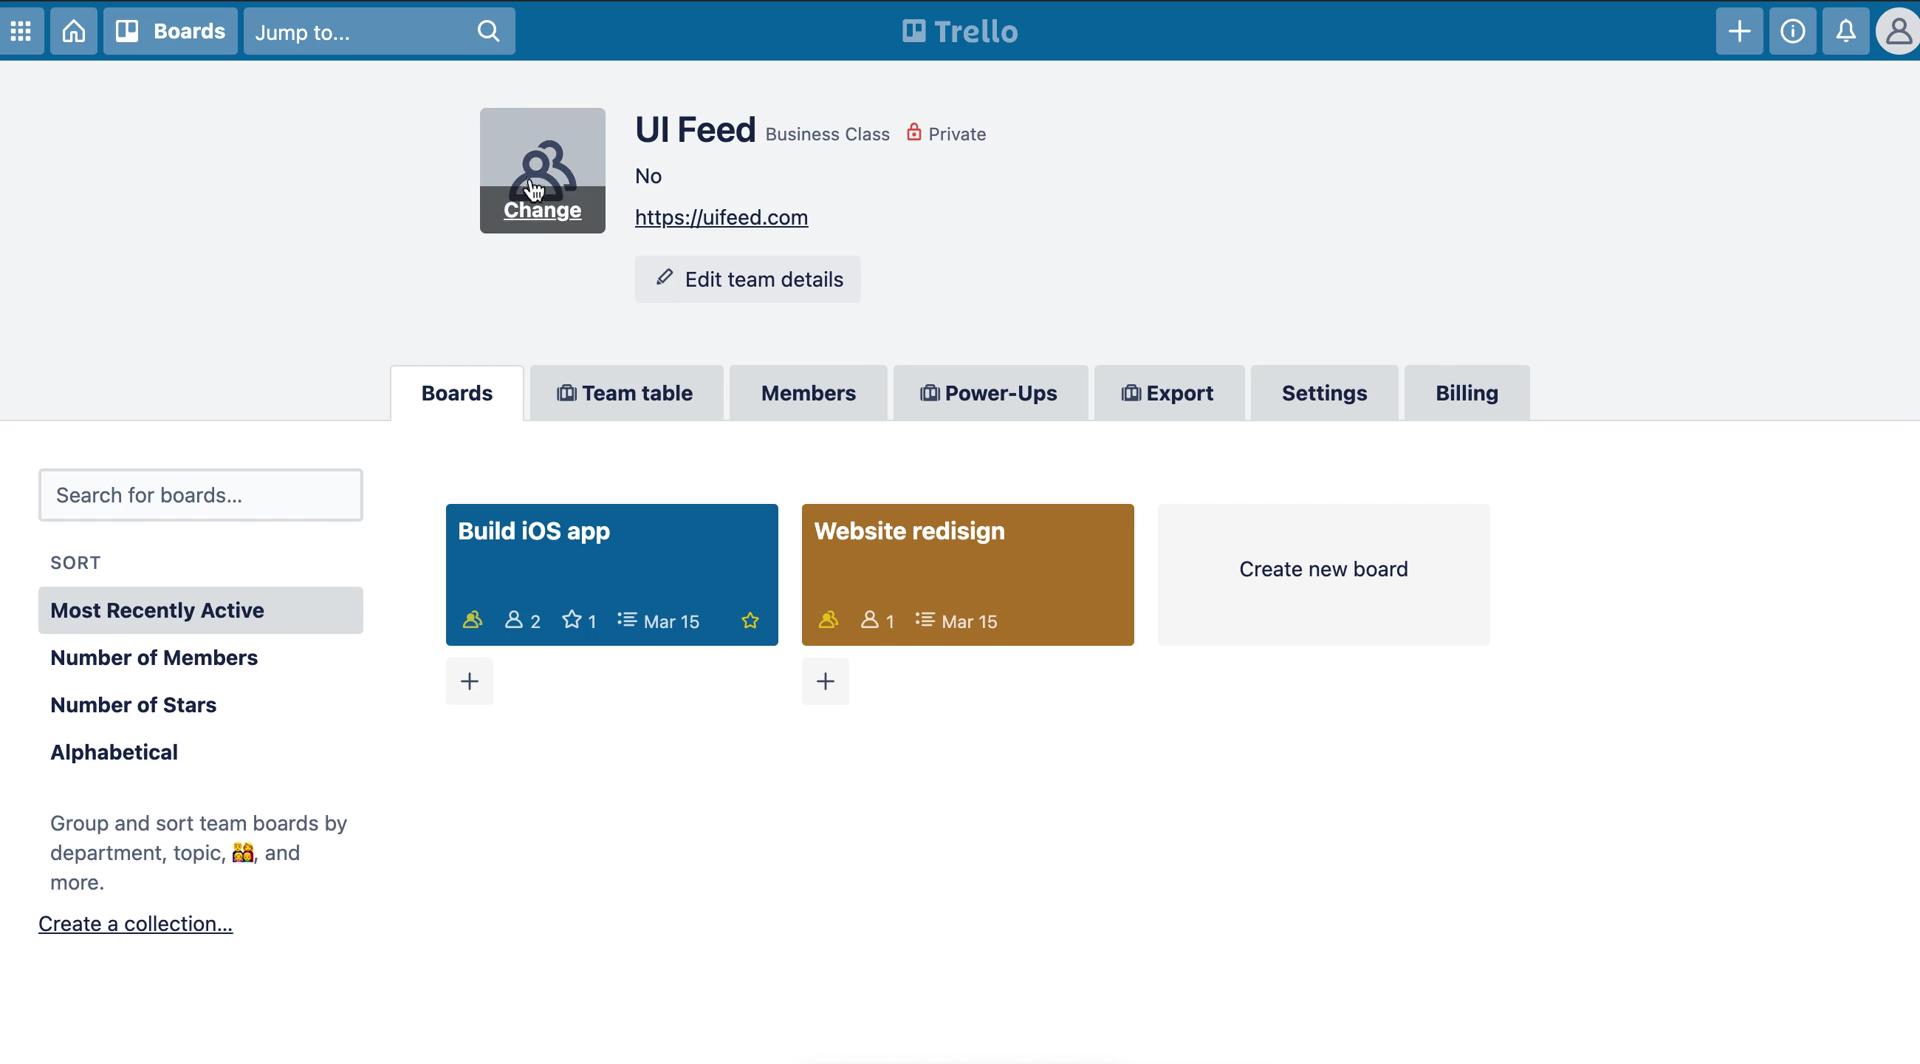 Screenshot of Boards on General browsing on Trello user flow